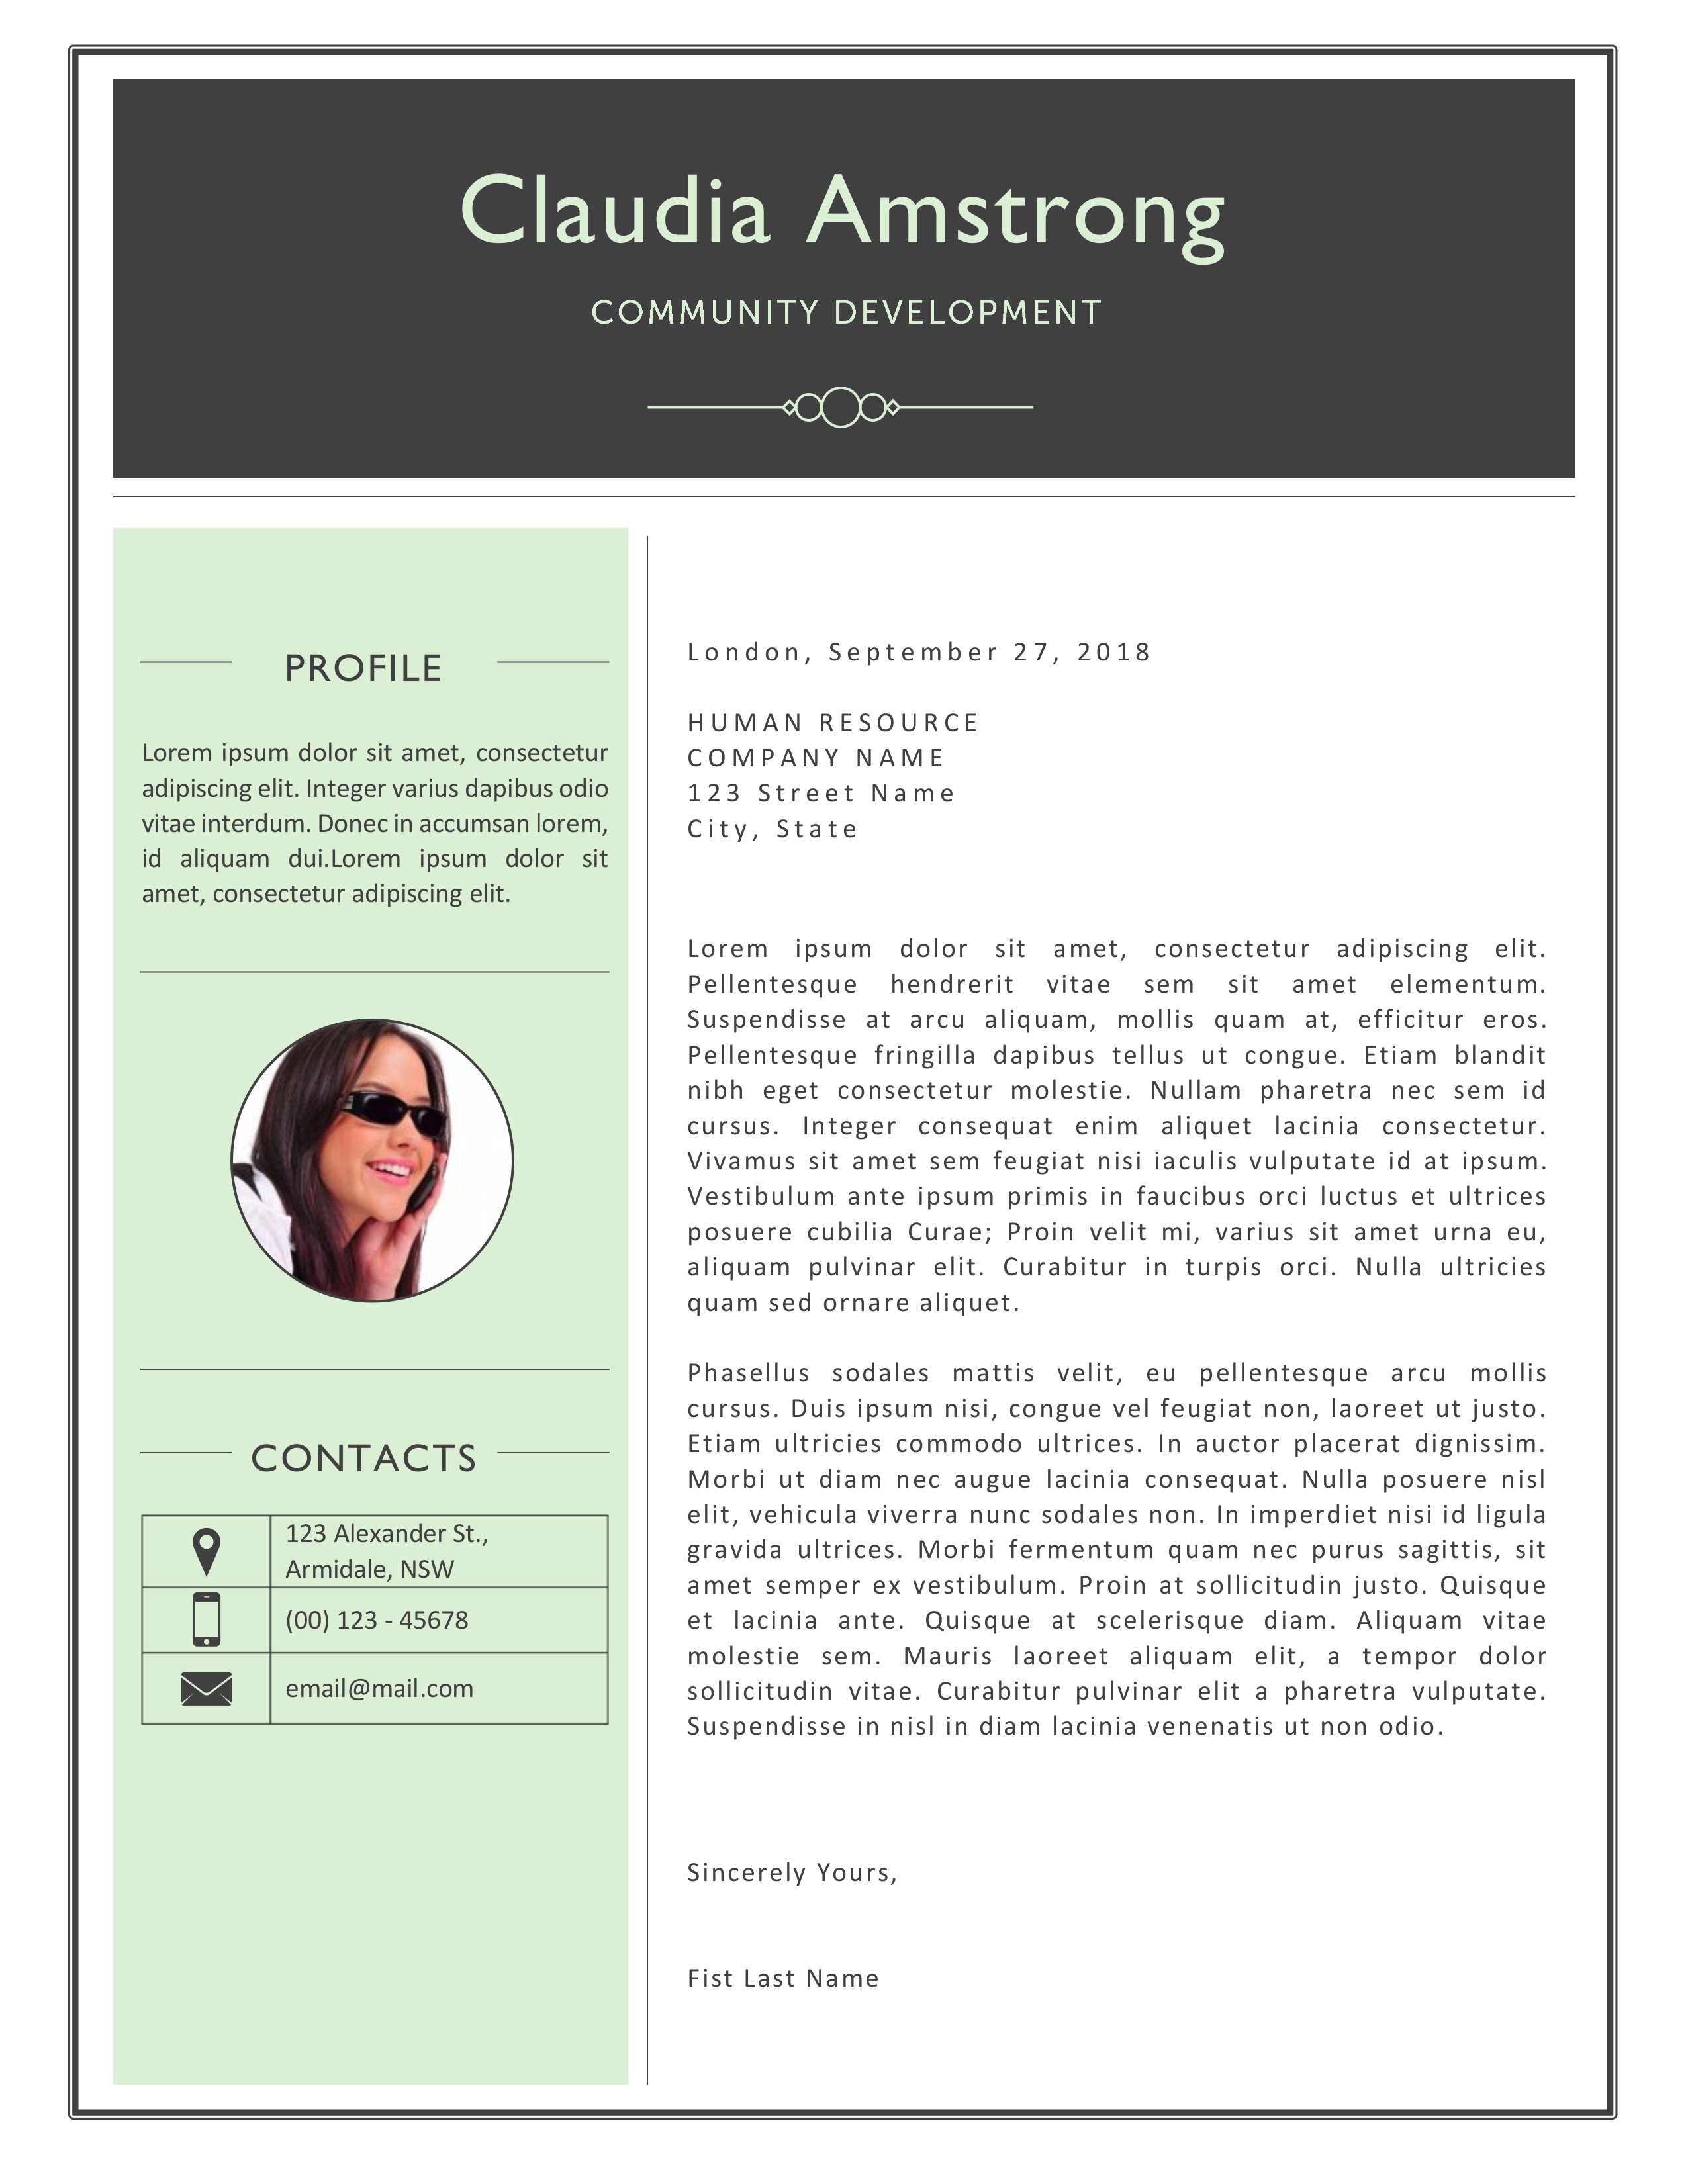 Green and black resume with a picture of a woman.